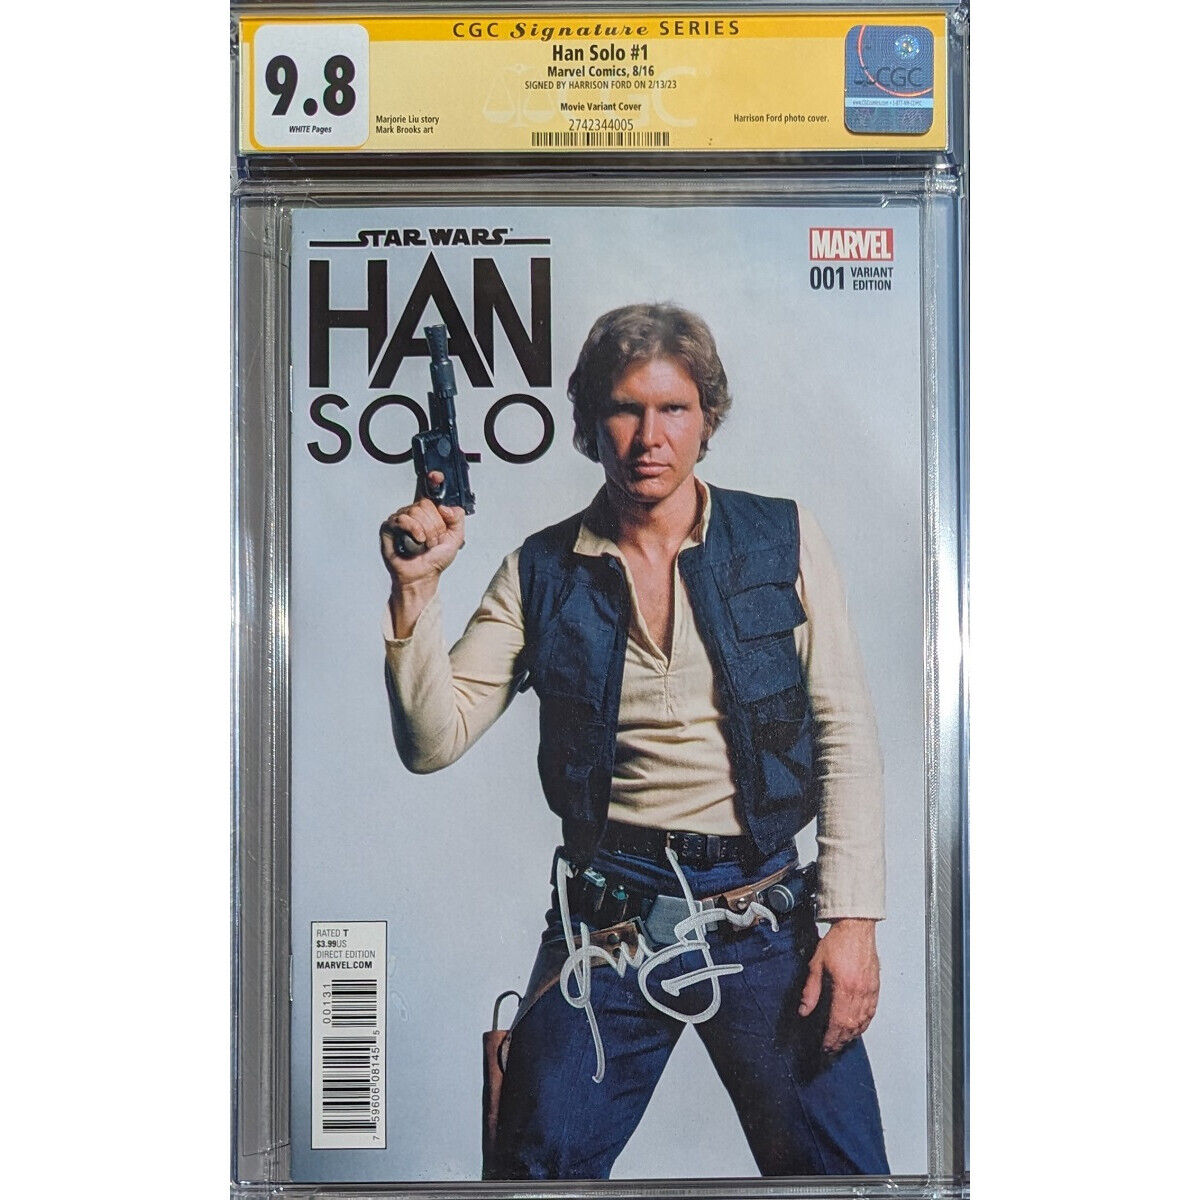 Han Solo #1__CGC 9.8 SS__Signed by Harrison Ford